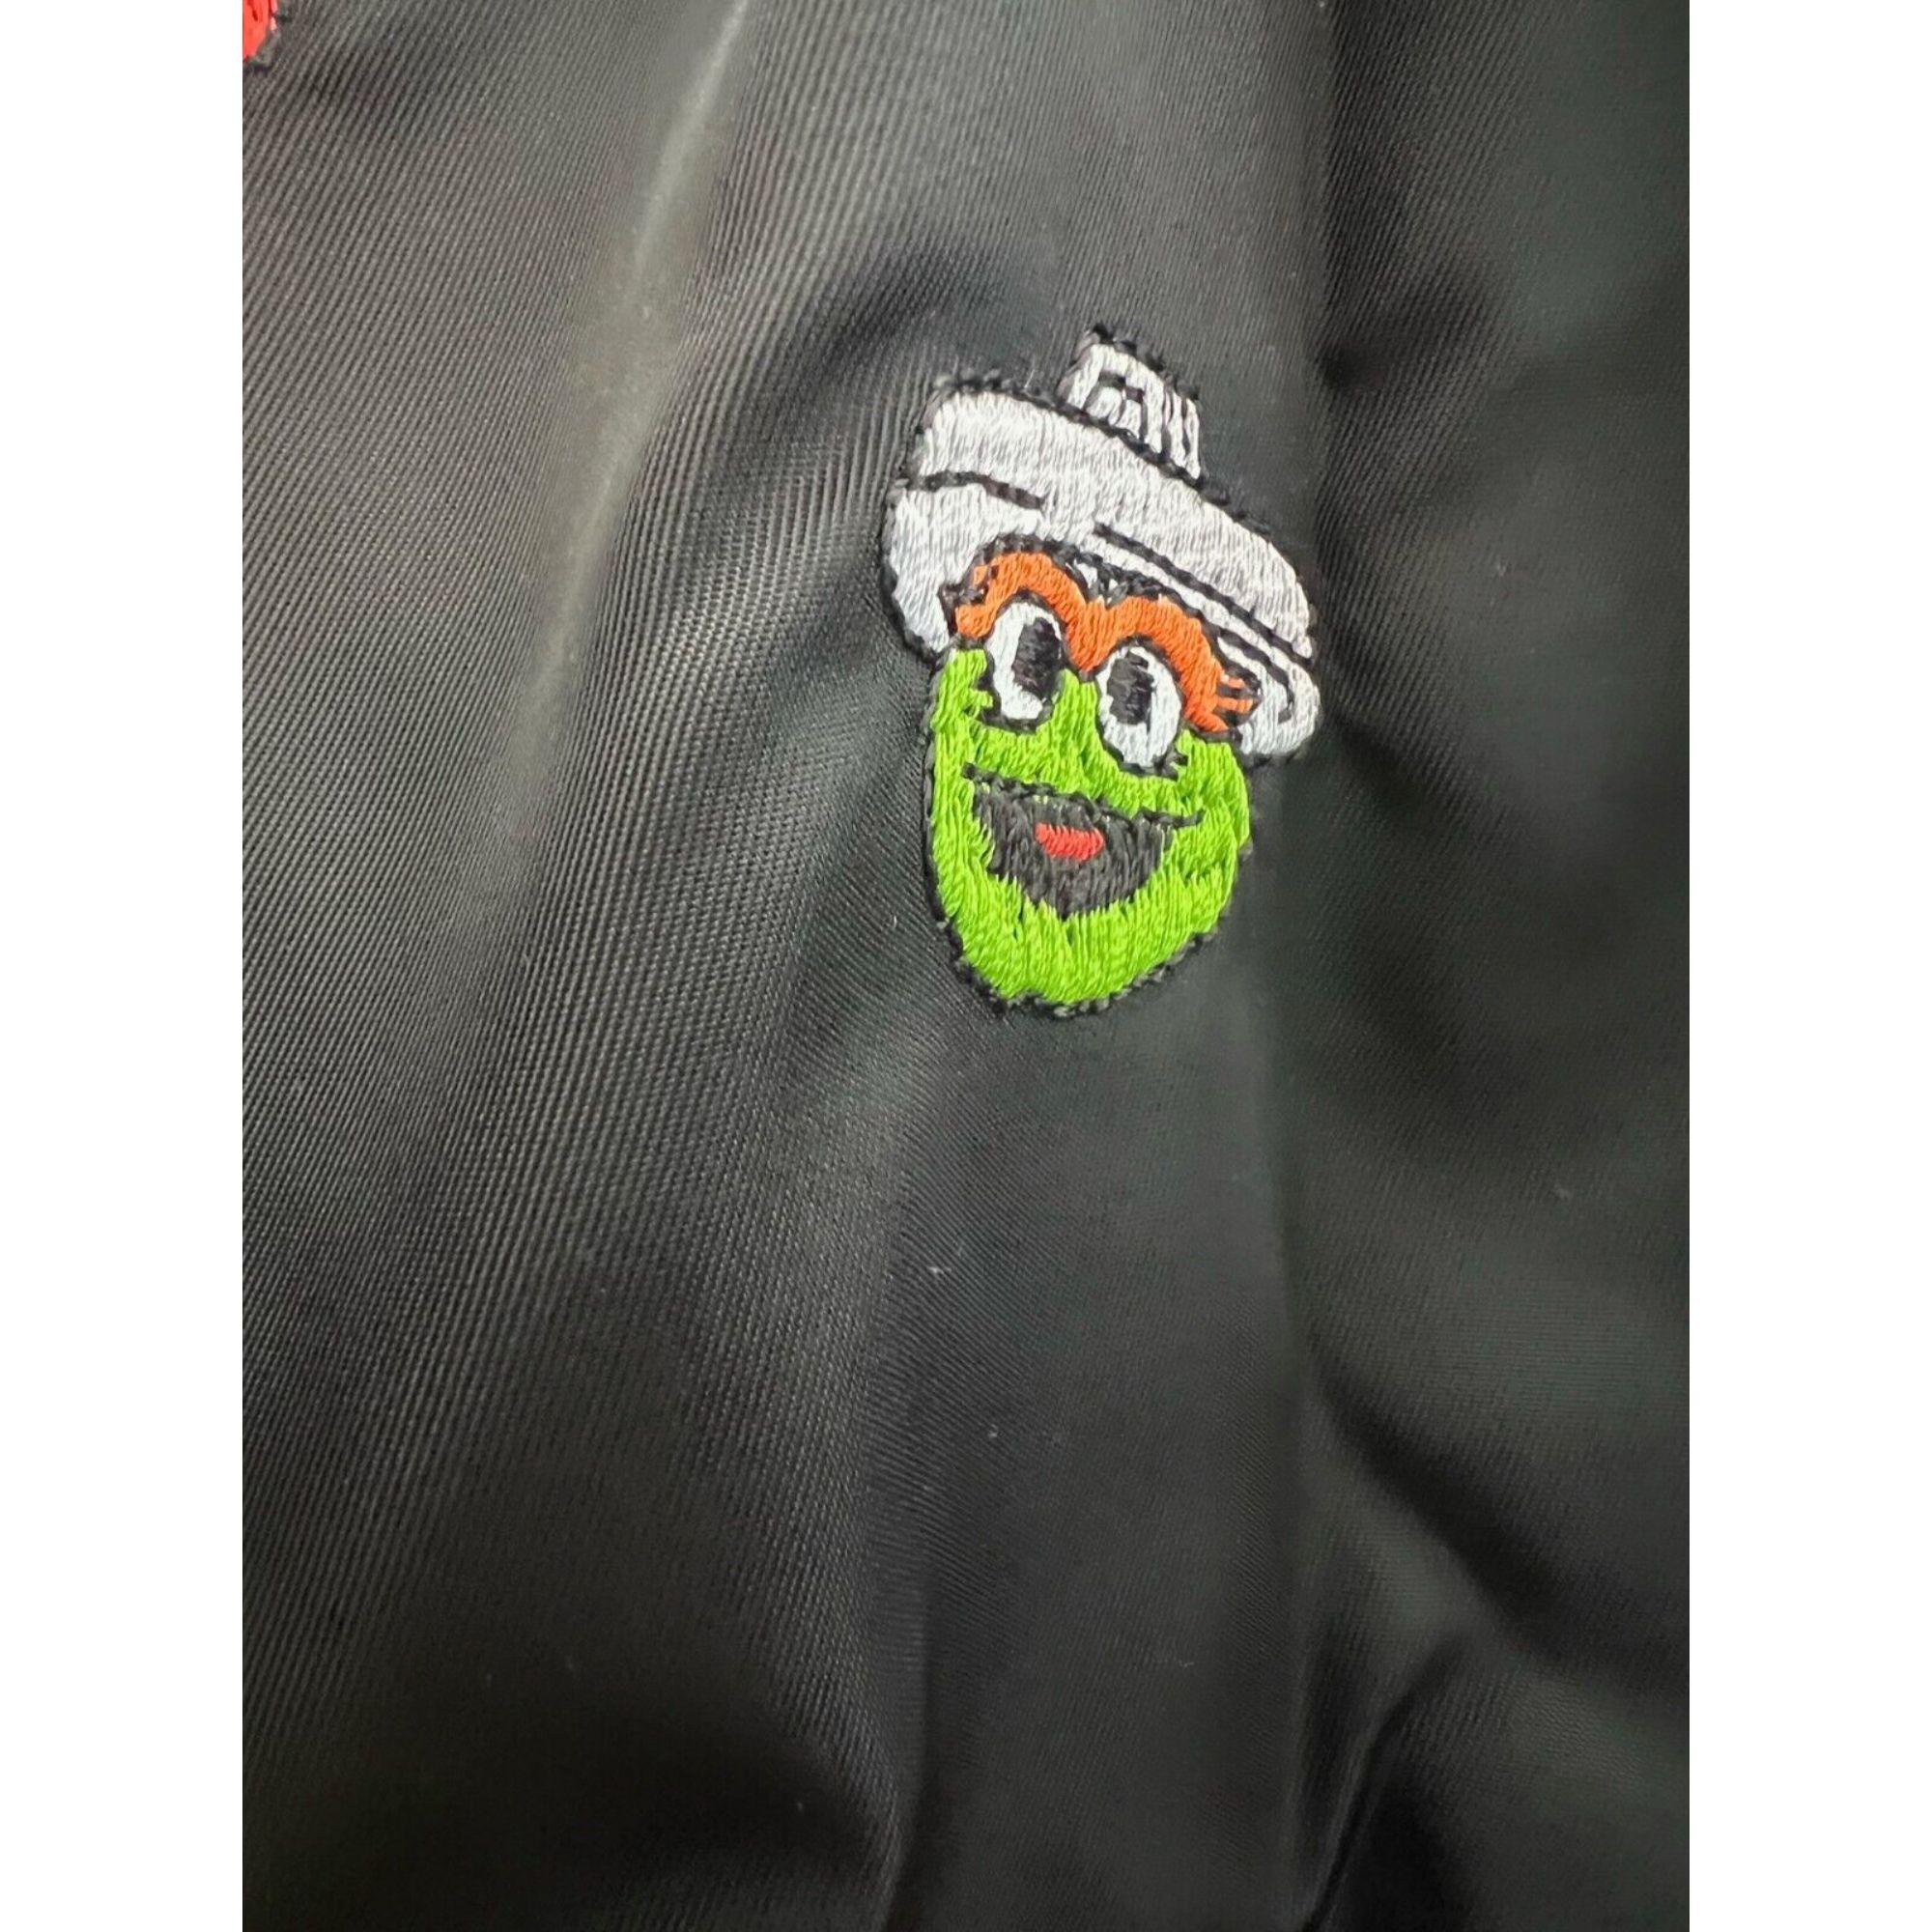 AW21 Moschino Couture Sesame Street Embroidered Hooded Jacket by Jeremy Scott For Sale 3